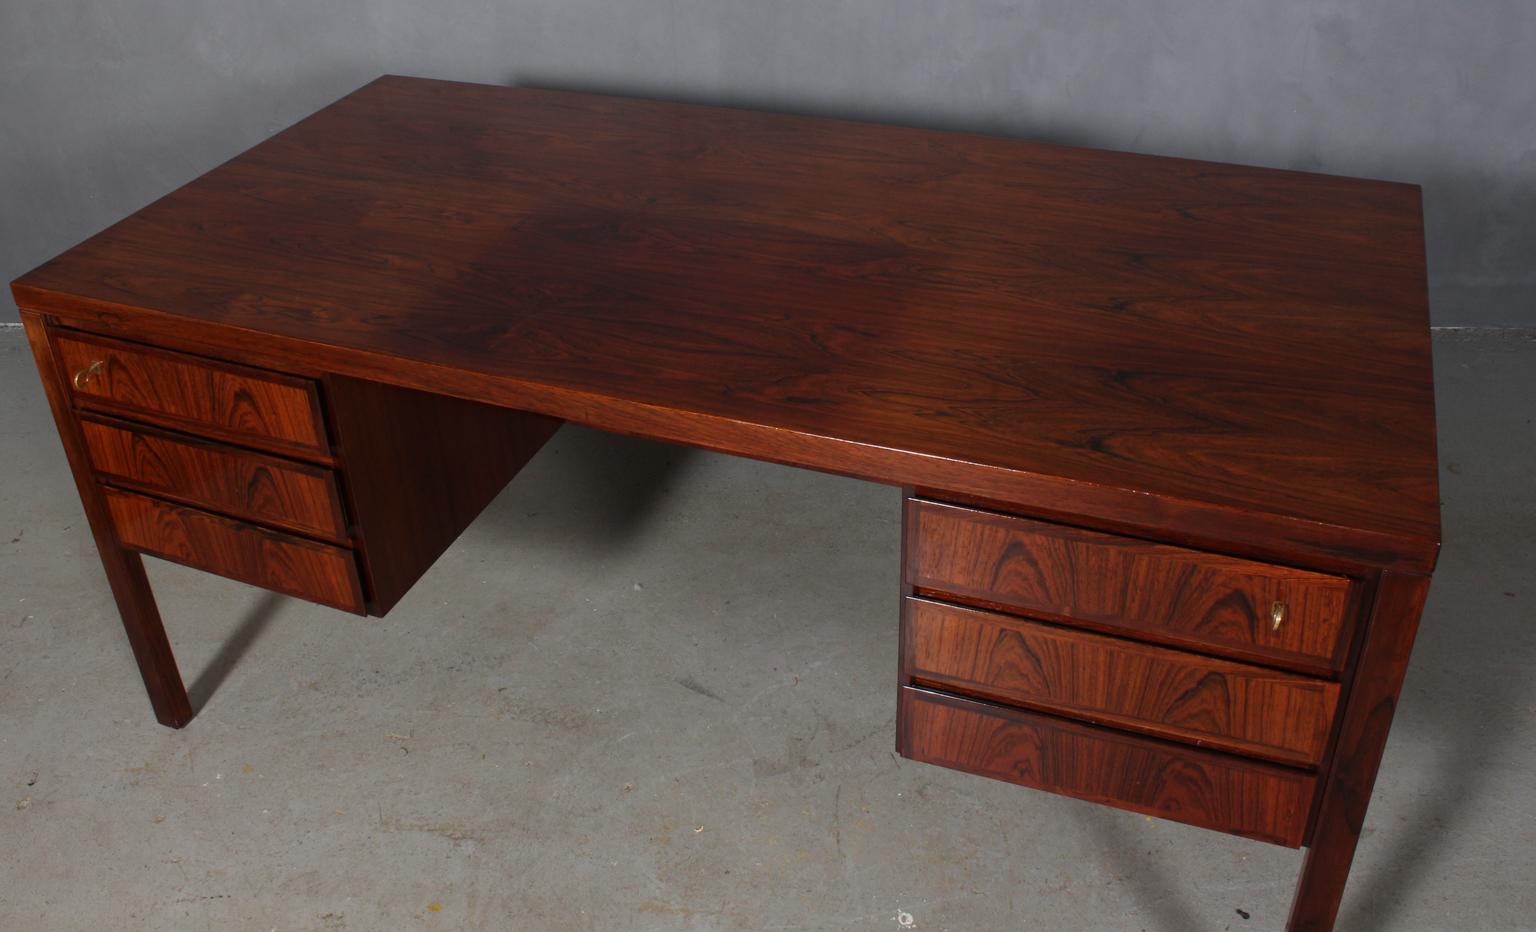 Omann Junior desk with drawers.

Made in rosewood.

Model 77.